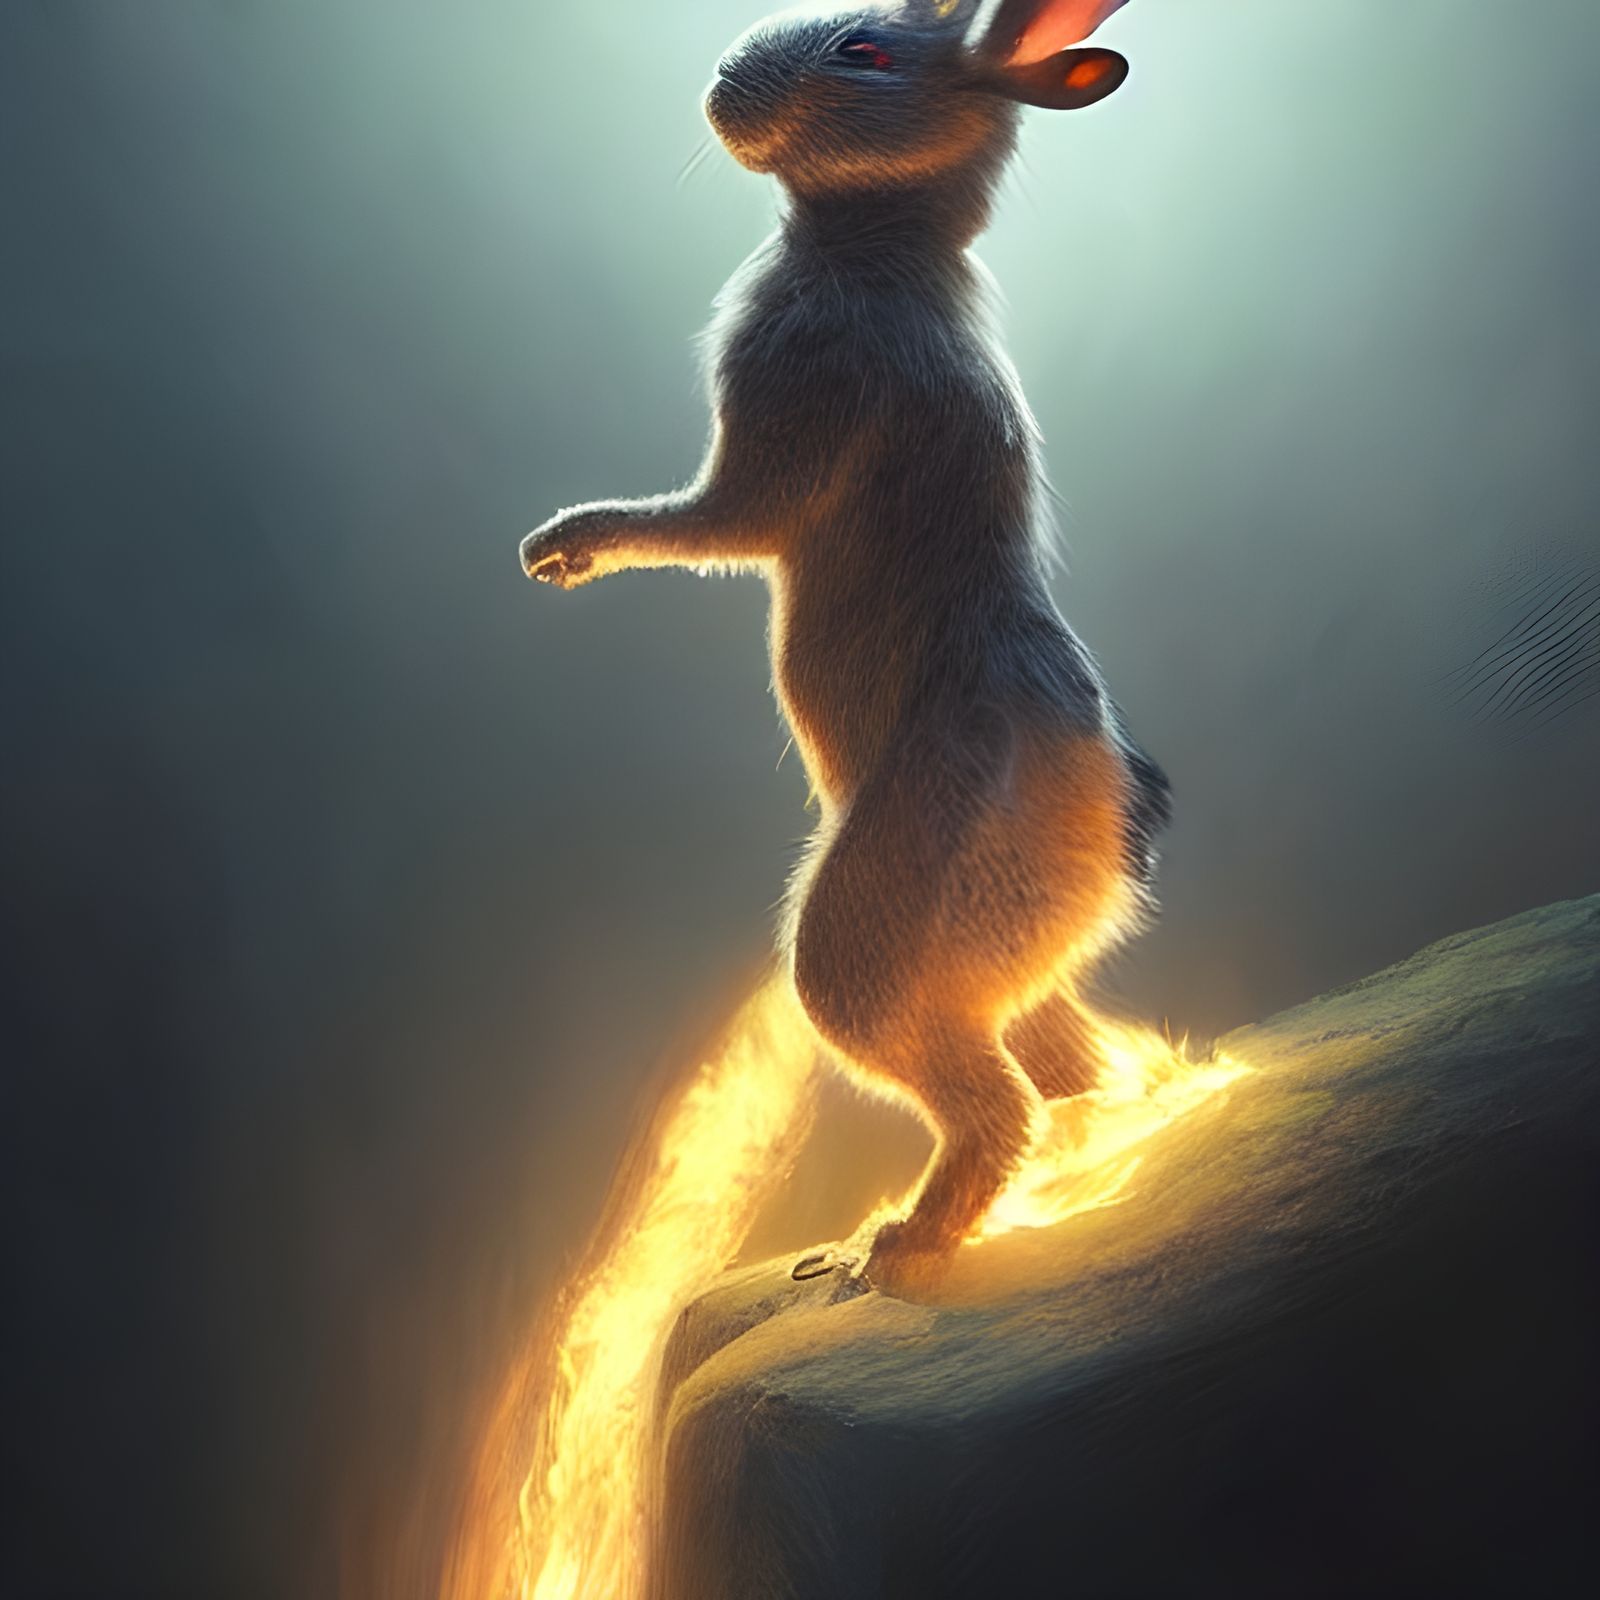 I asked for a fire breathing rabbit…